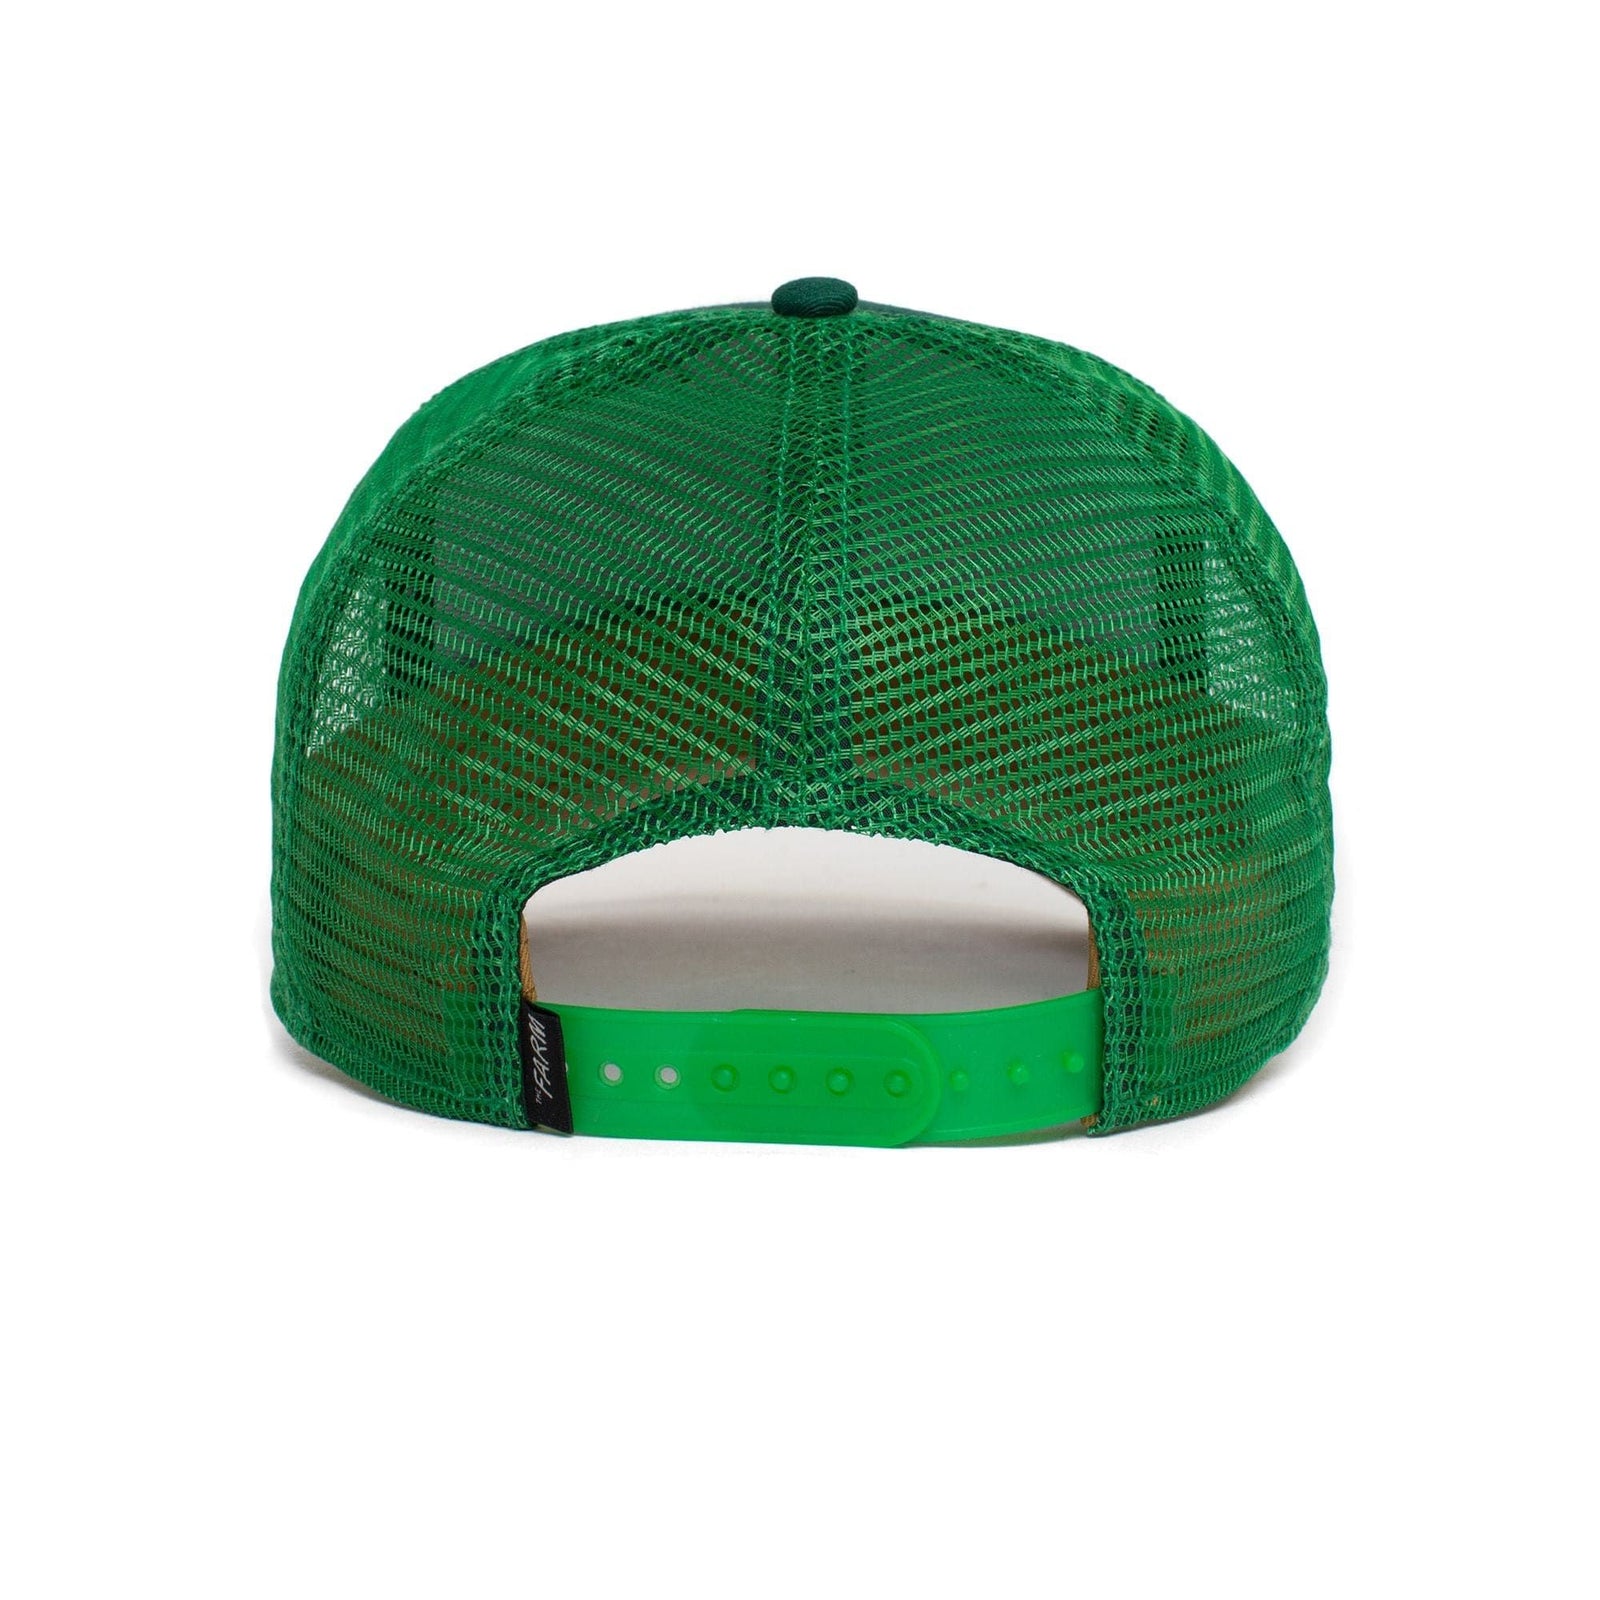 Tiger Pro Trucker Hat in Forest Green and Dandelion